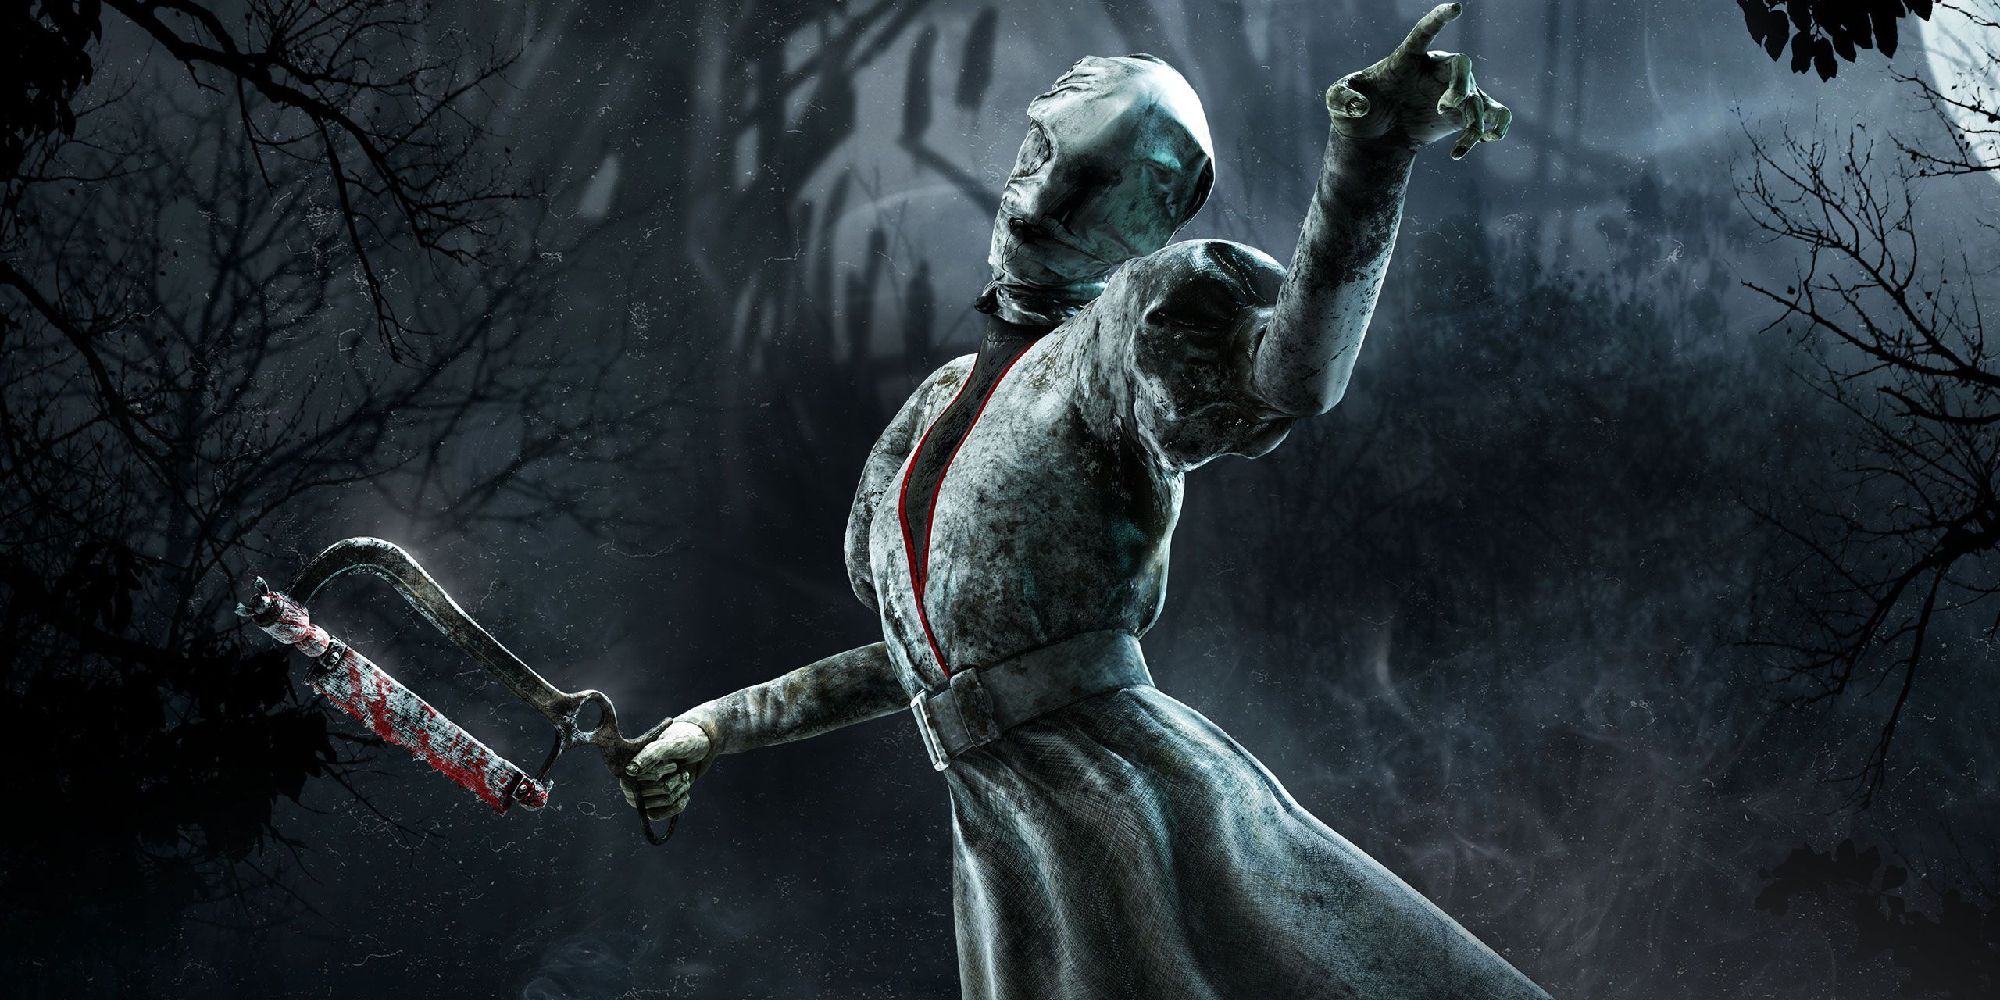 The Nurse from Dead by Daylight hovers in a moonlit woodland, preparing her special blink attack. 